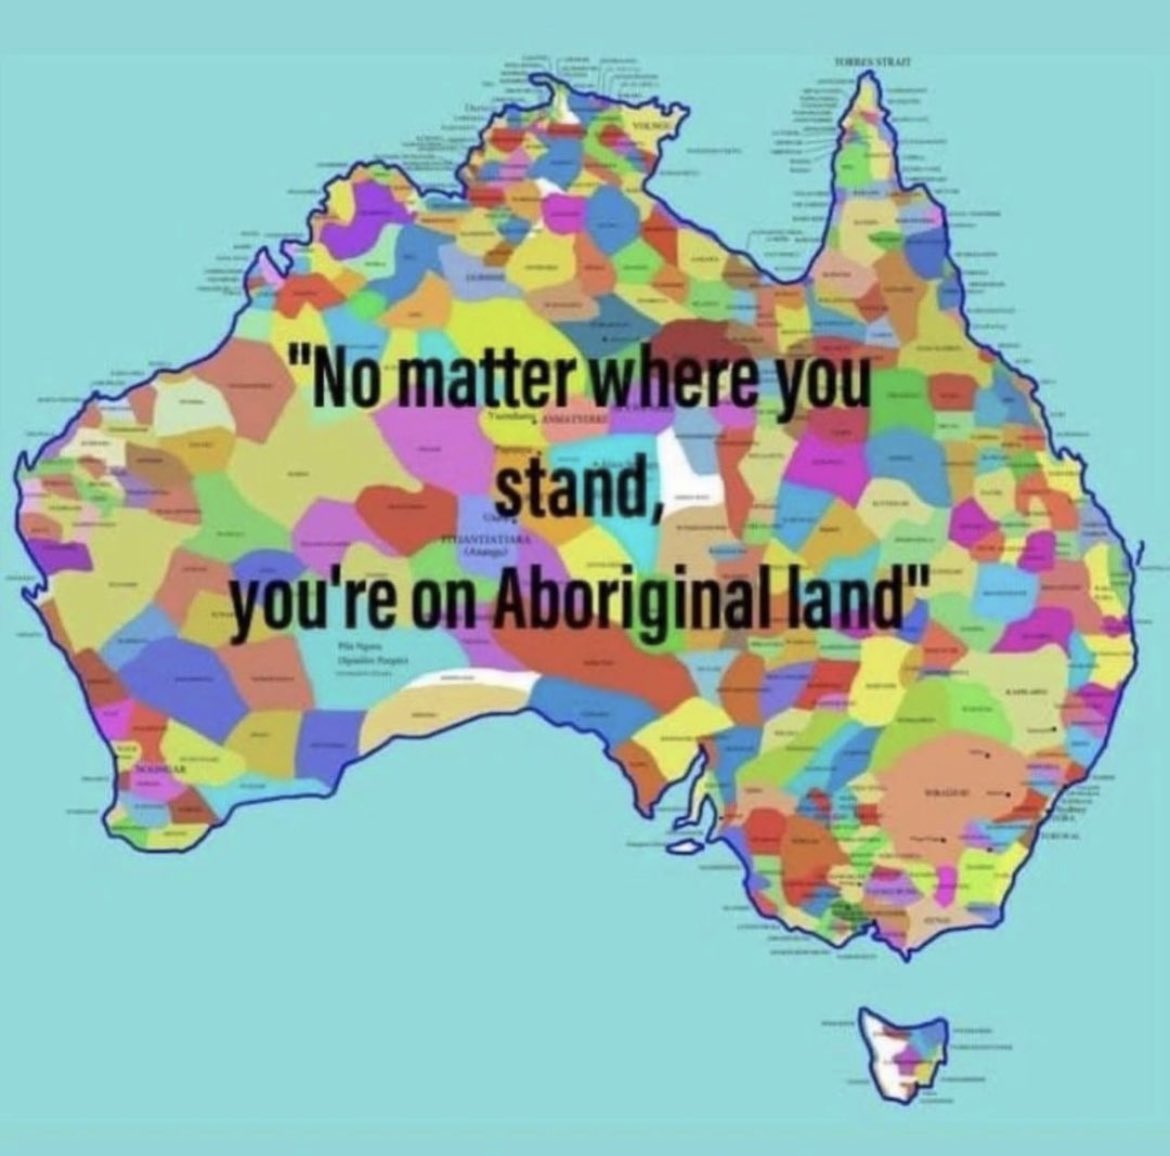 I acknowledge the Yuggera and Turrabul people as the traditional land owners of Meanyin (Brisbane) country. #AlwaysWasAlwaysWillBe #SurvivalDay #InvasionDay #NotADateToCelebrate